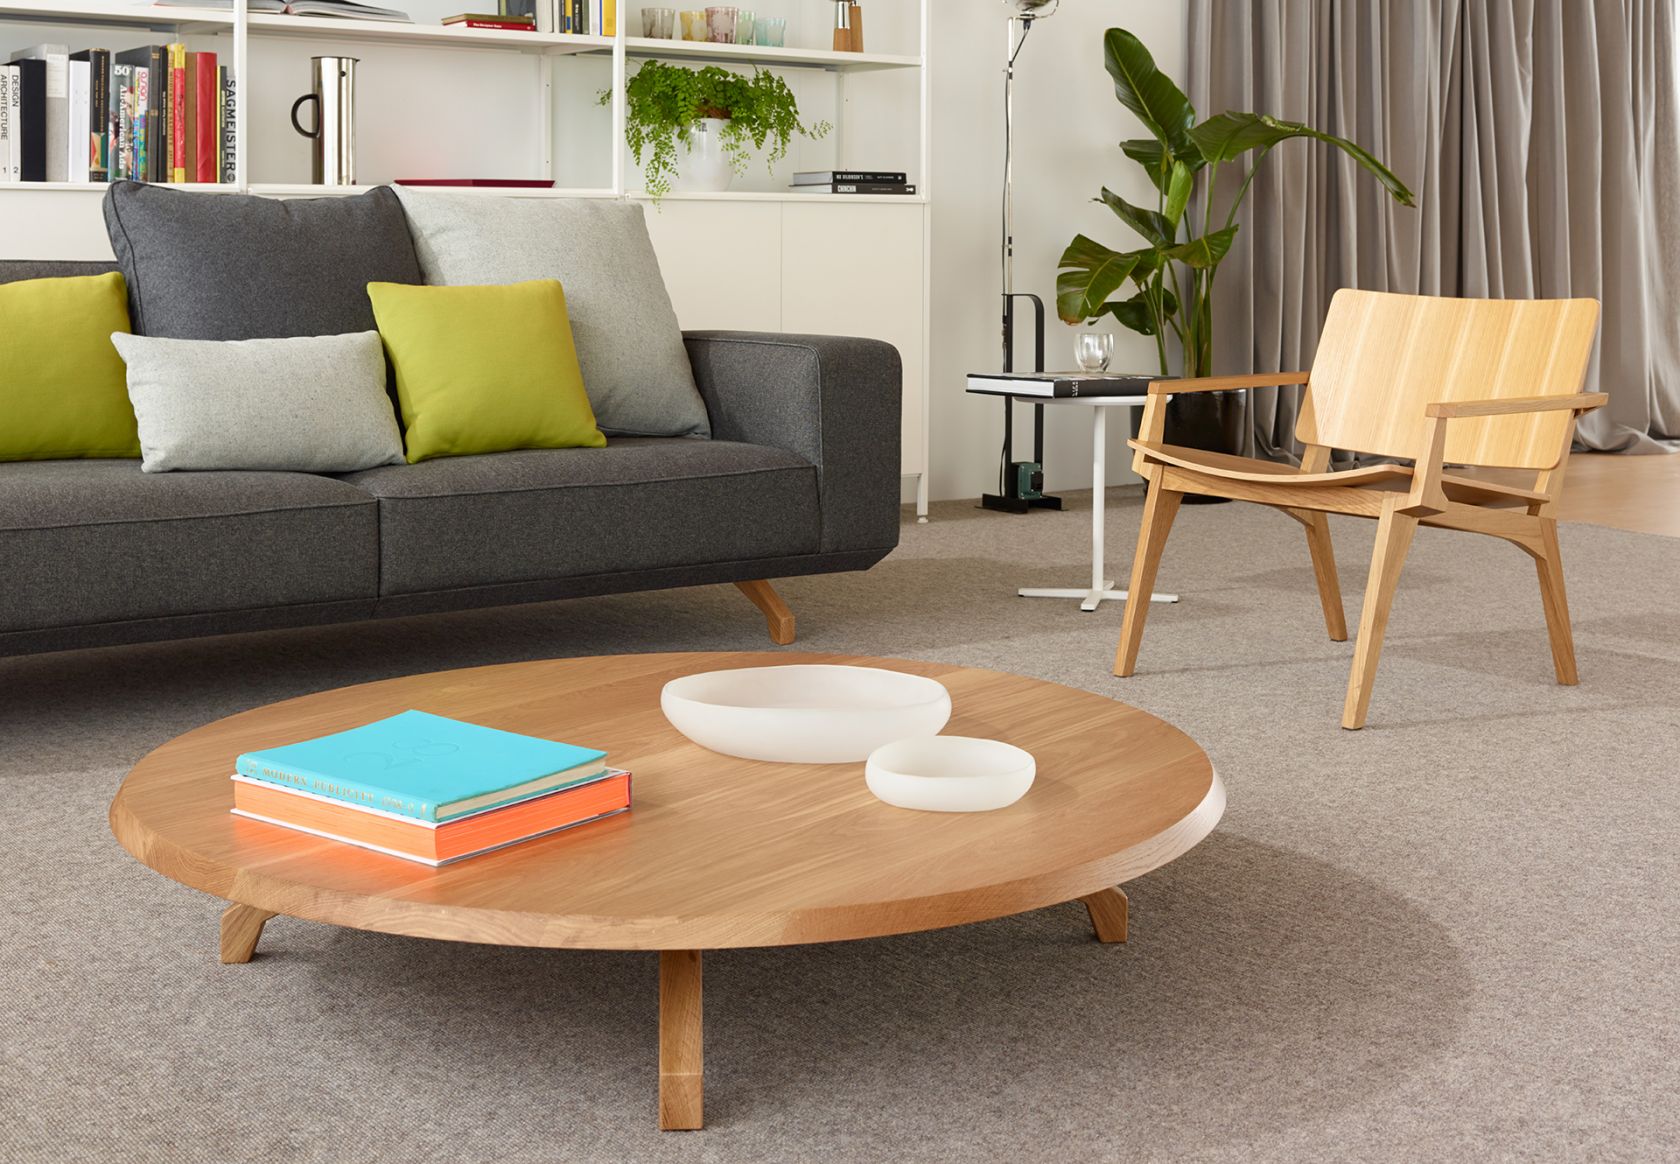 Bomba Table, Bomba Sofa, Maui Chair, Kase Storage, OTM Table and Scatter Platter Cushions